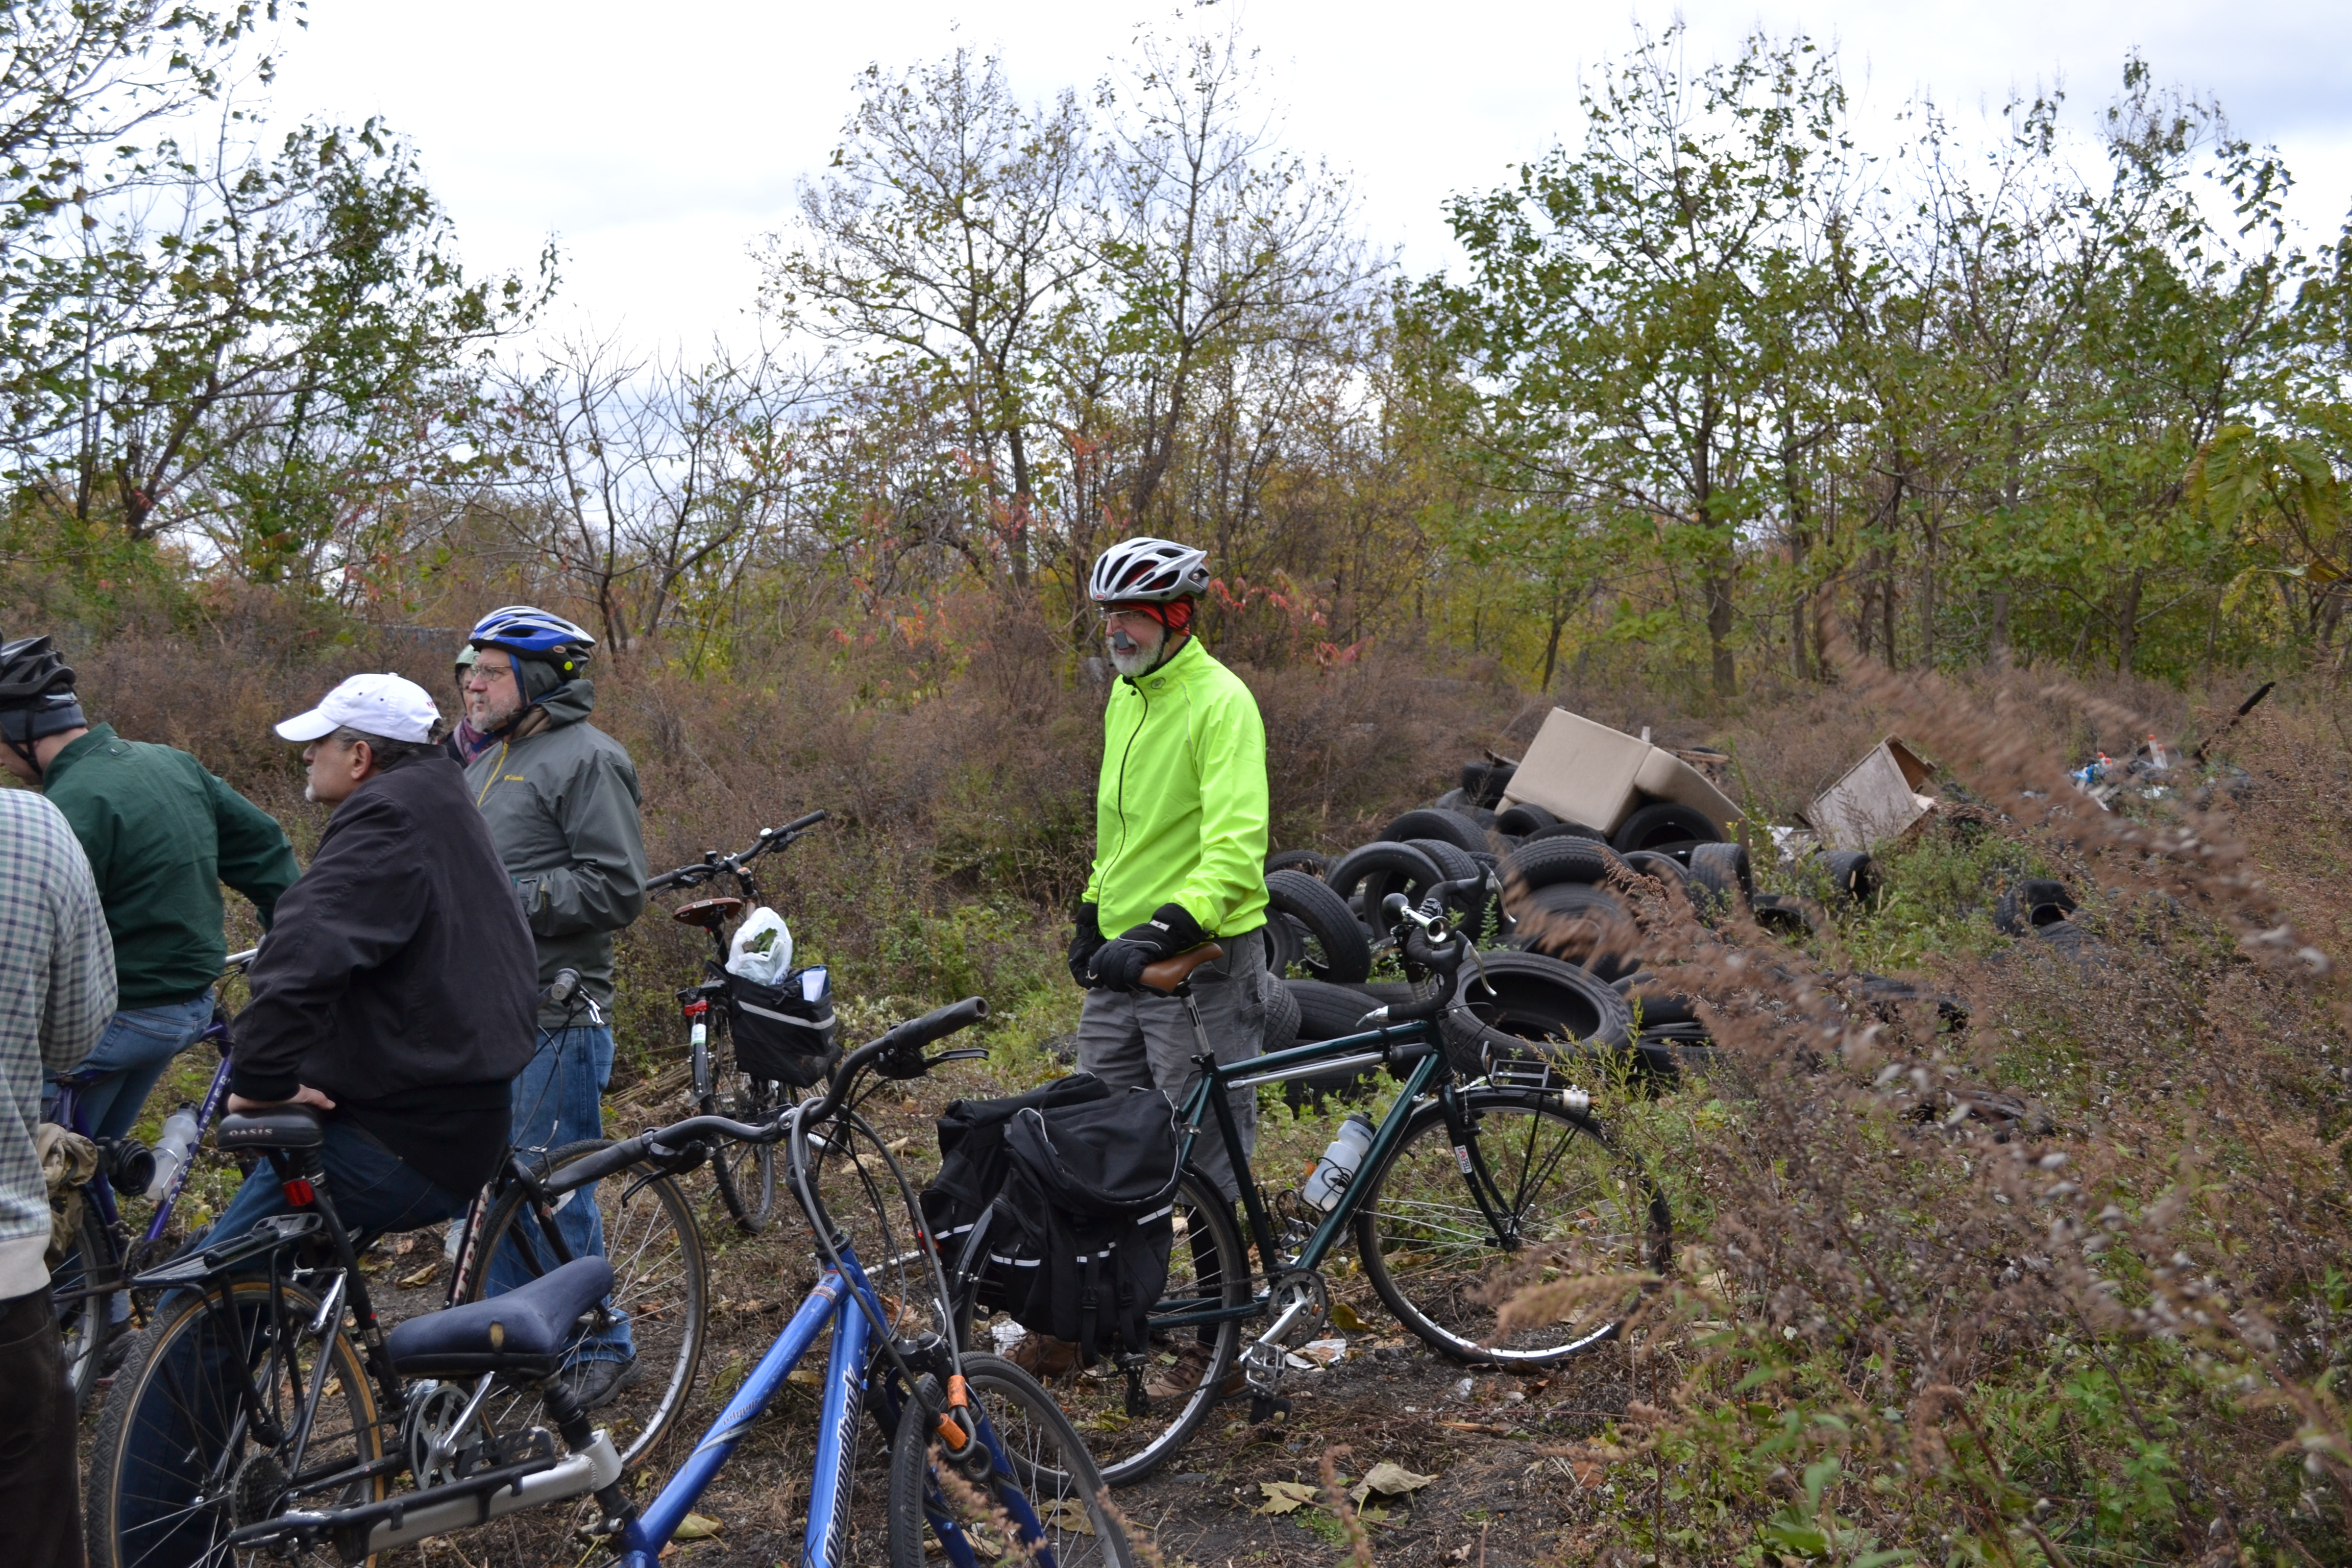 Much of the future Bartram's Mile is currently lined with trash or sites where people have dumped tires and debris